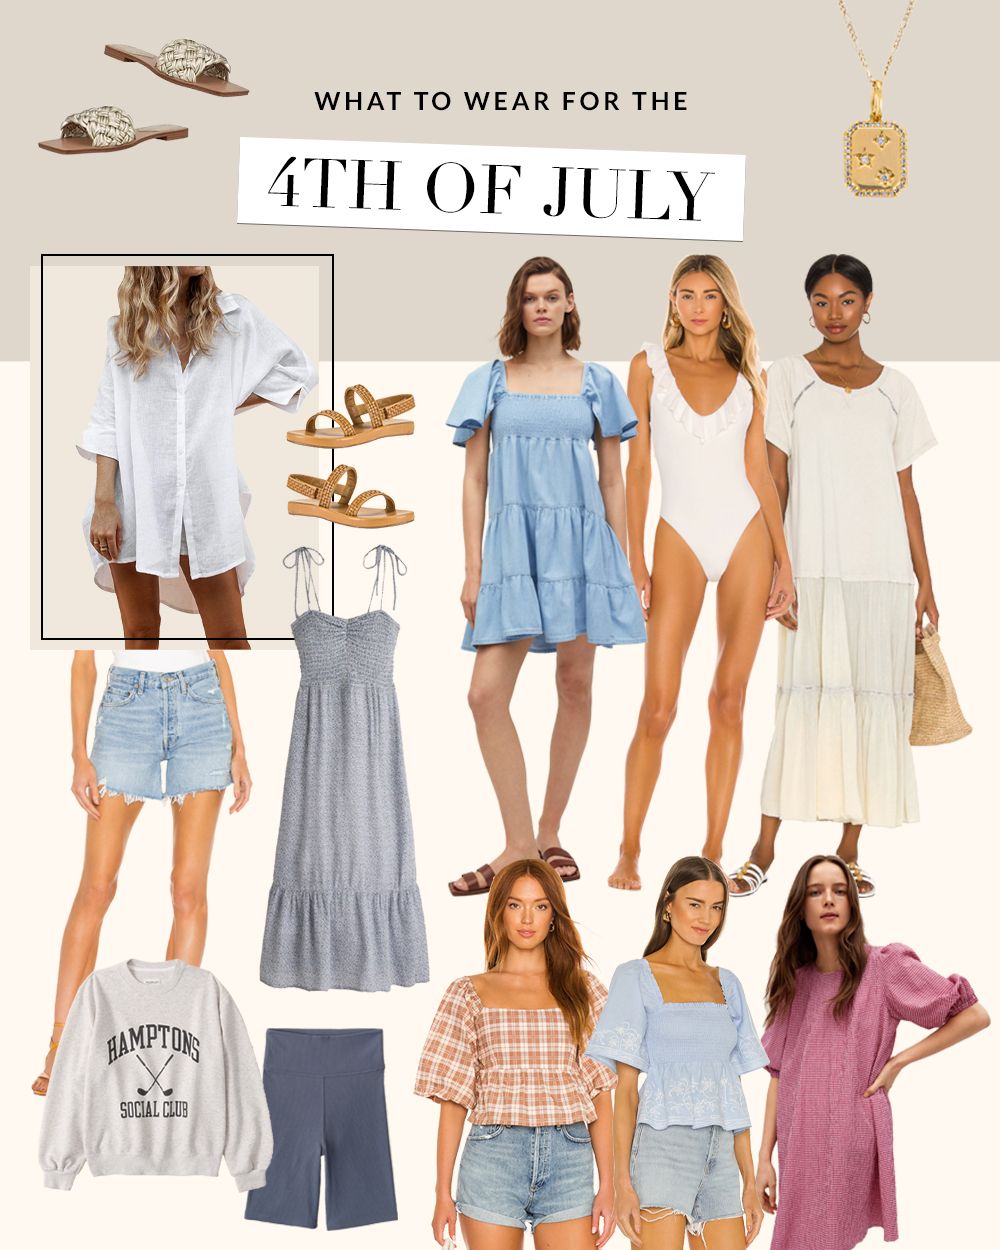 What to Wear for the 4th of July